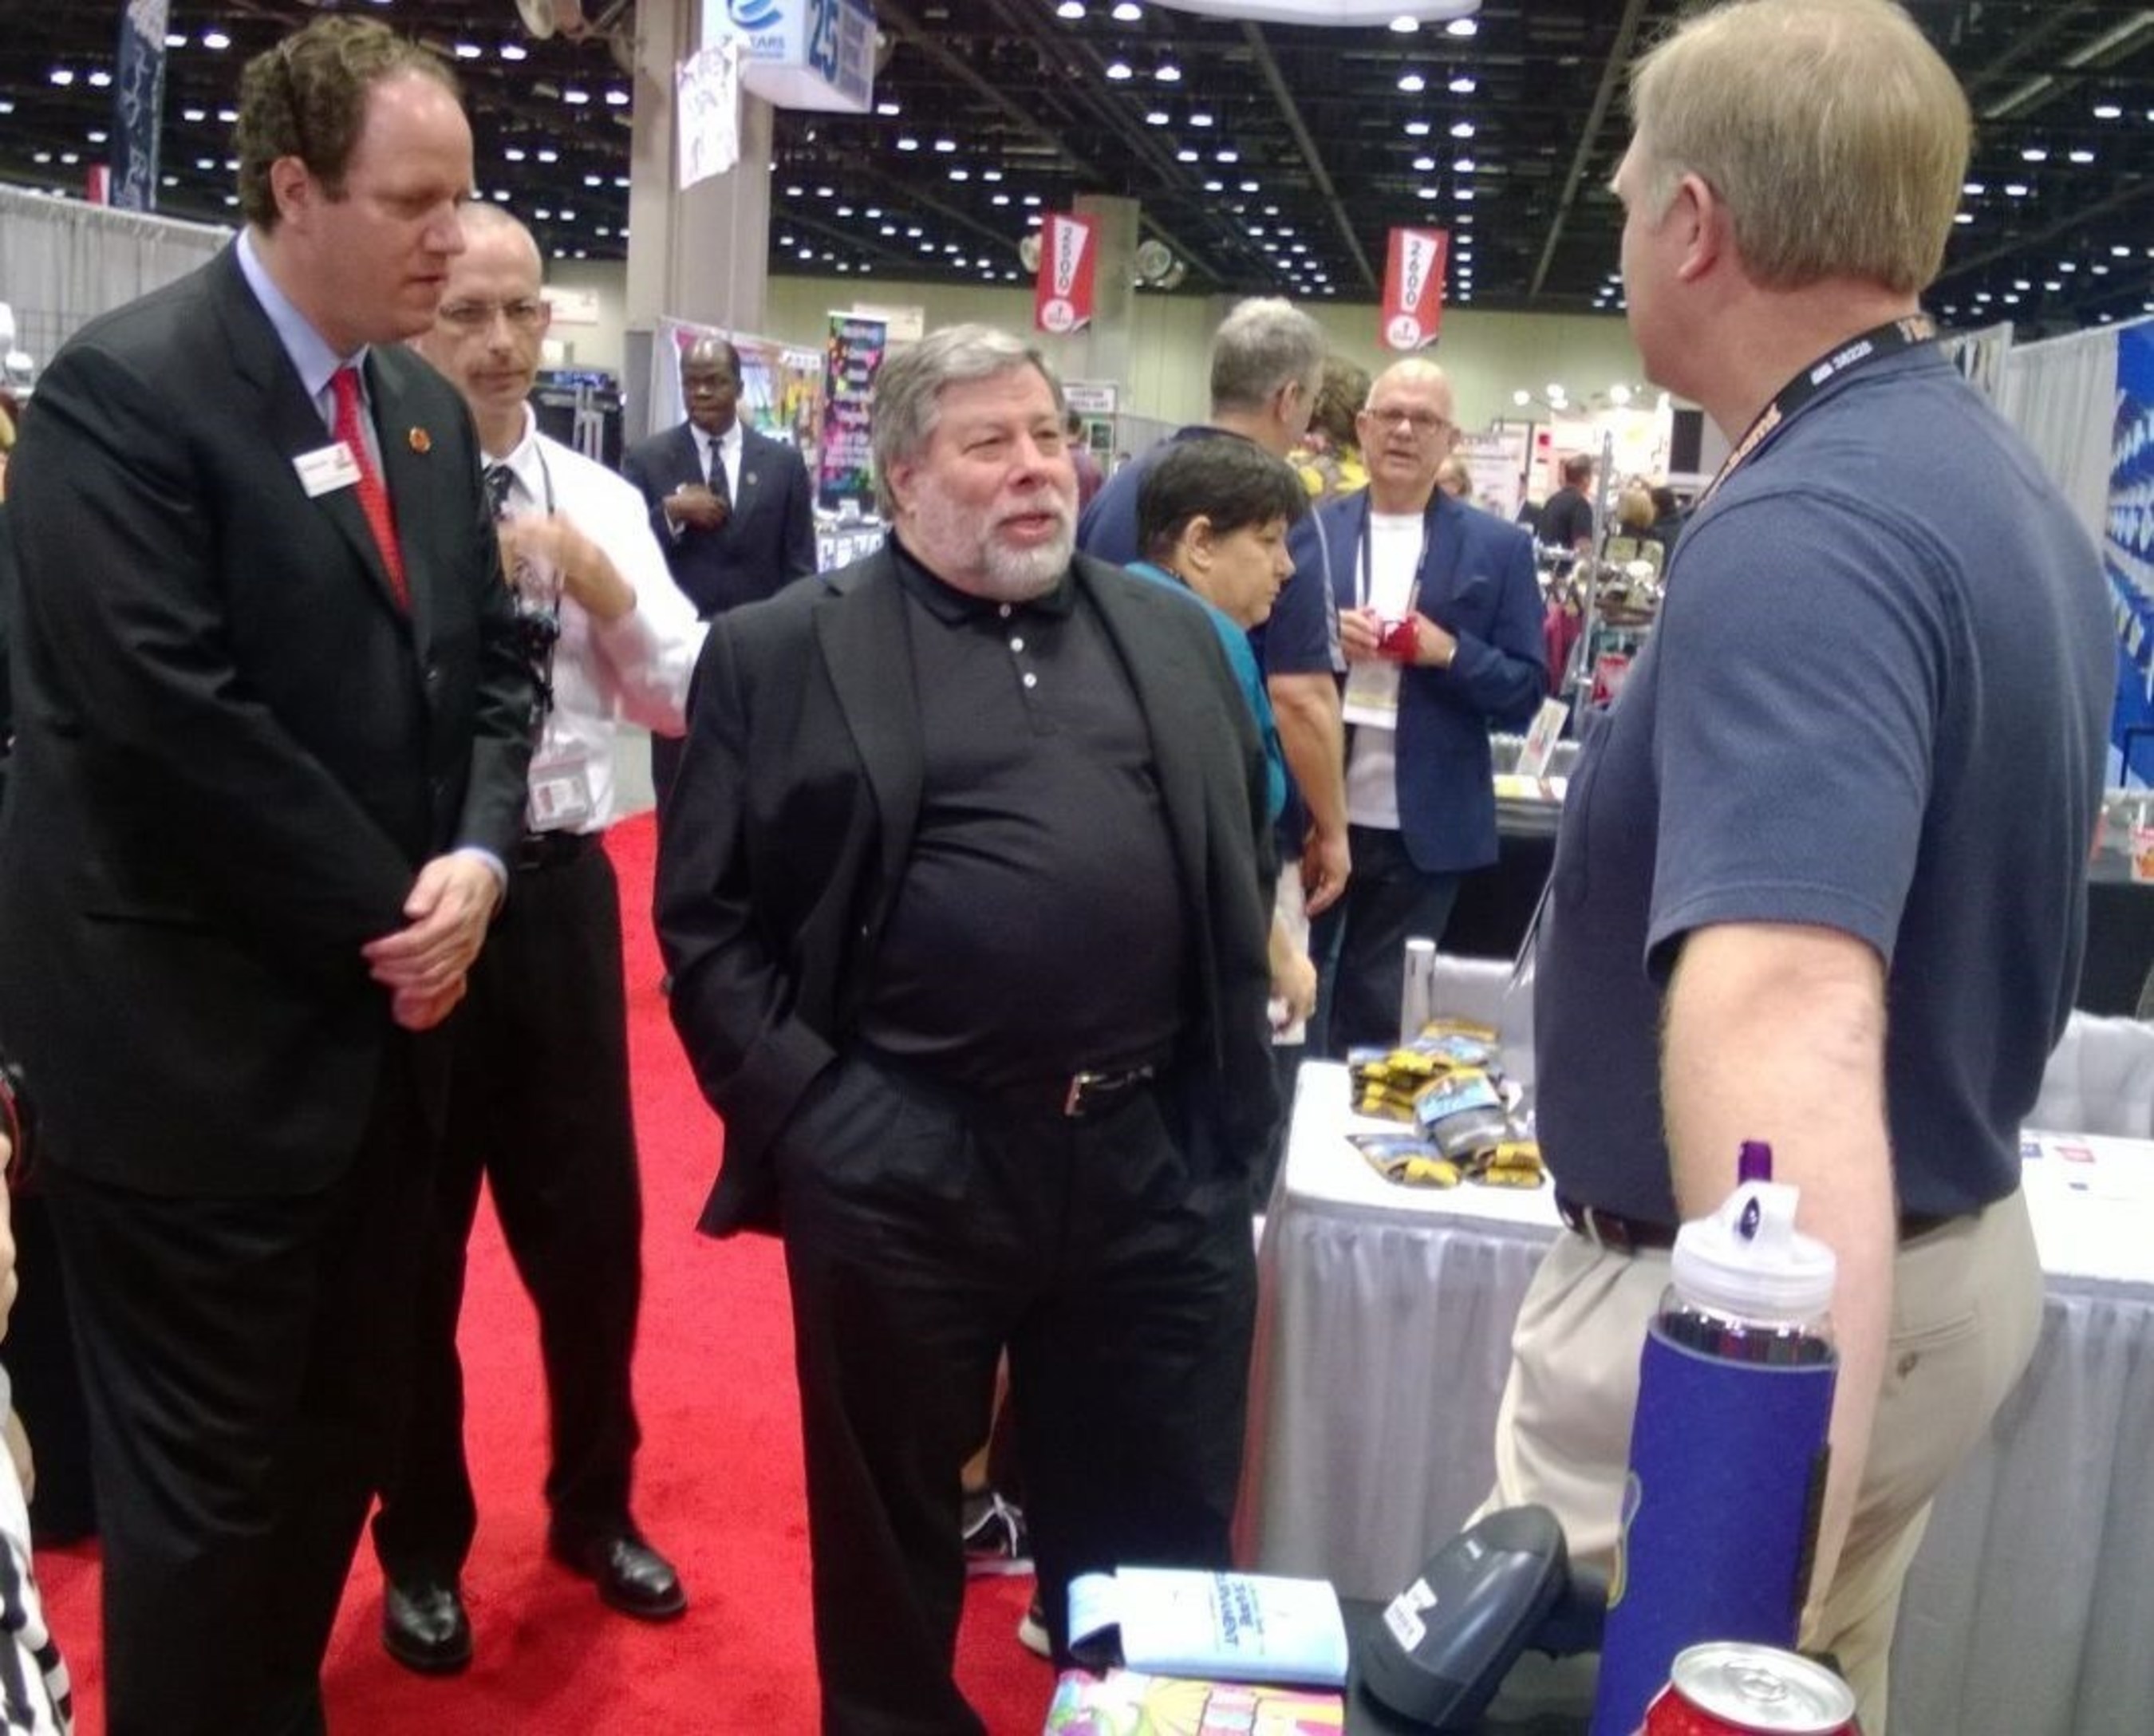 Apple co-founder Steve Wozniak, center, tours the show floor at ASI Show Orlando Tuesday with ASI vice-chairman Matthew Cohn, far left, after a keynote Q&A before a packed house of promotional products suppliers and distributors.